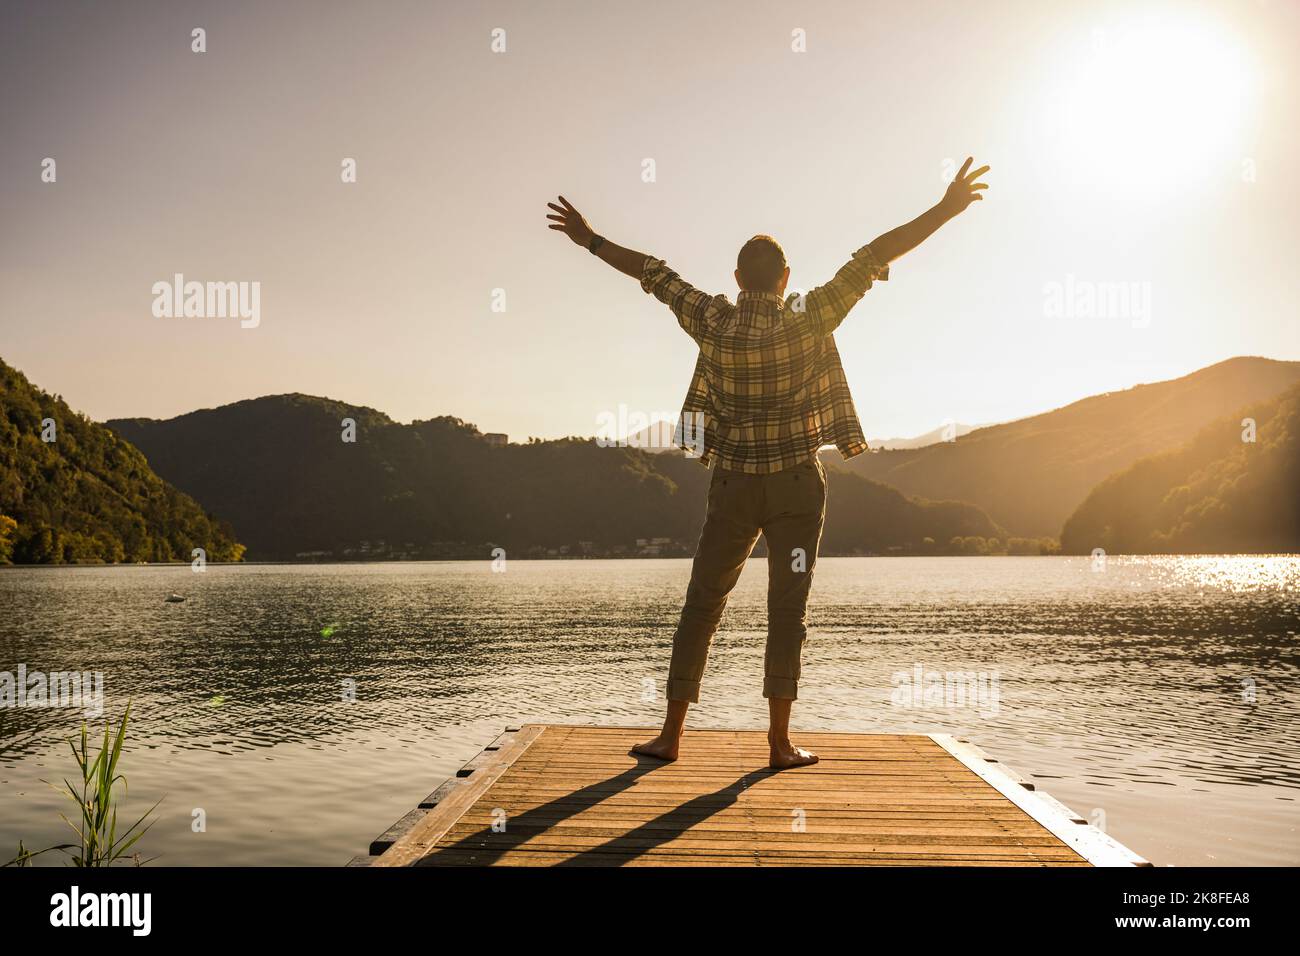 Mature man standing with arms raised on jetty by mountains Stock Photo